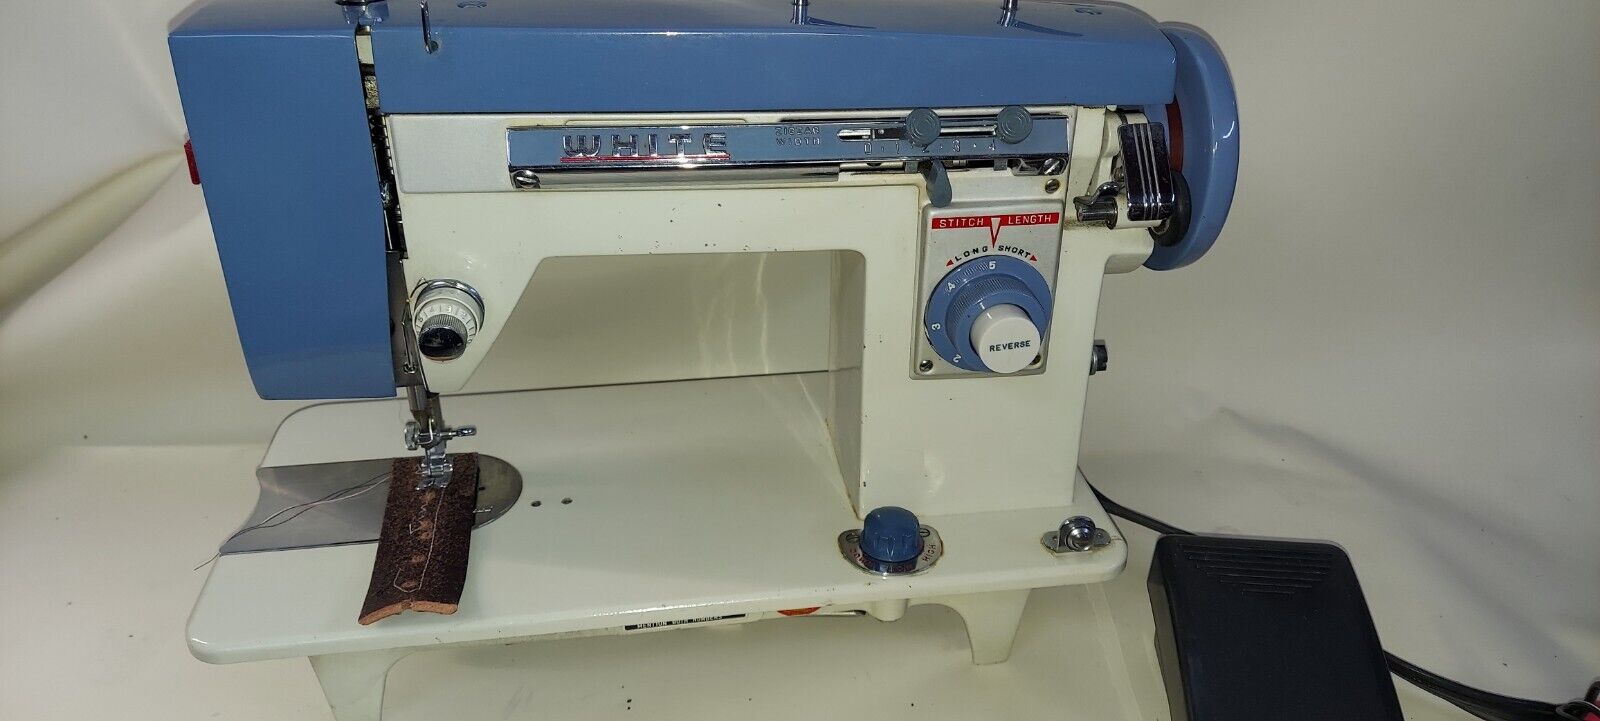 LEATHER UPHOLSTERY CANVAS DENIM HEAVY DUTY  WHITE 265 SEWING MACHINE SERVICED 